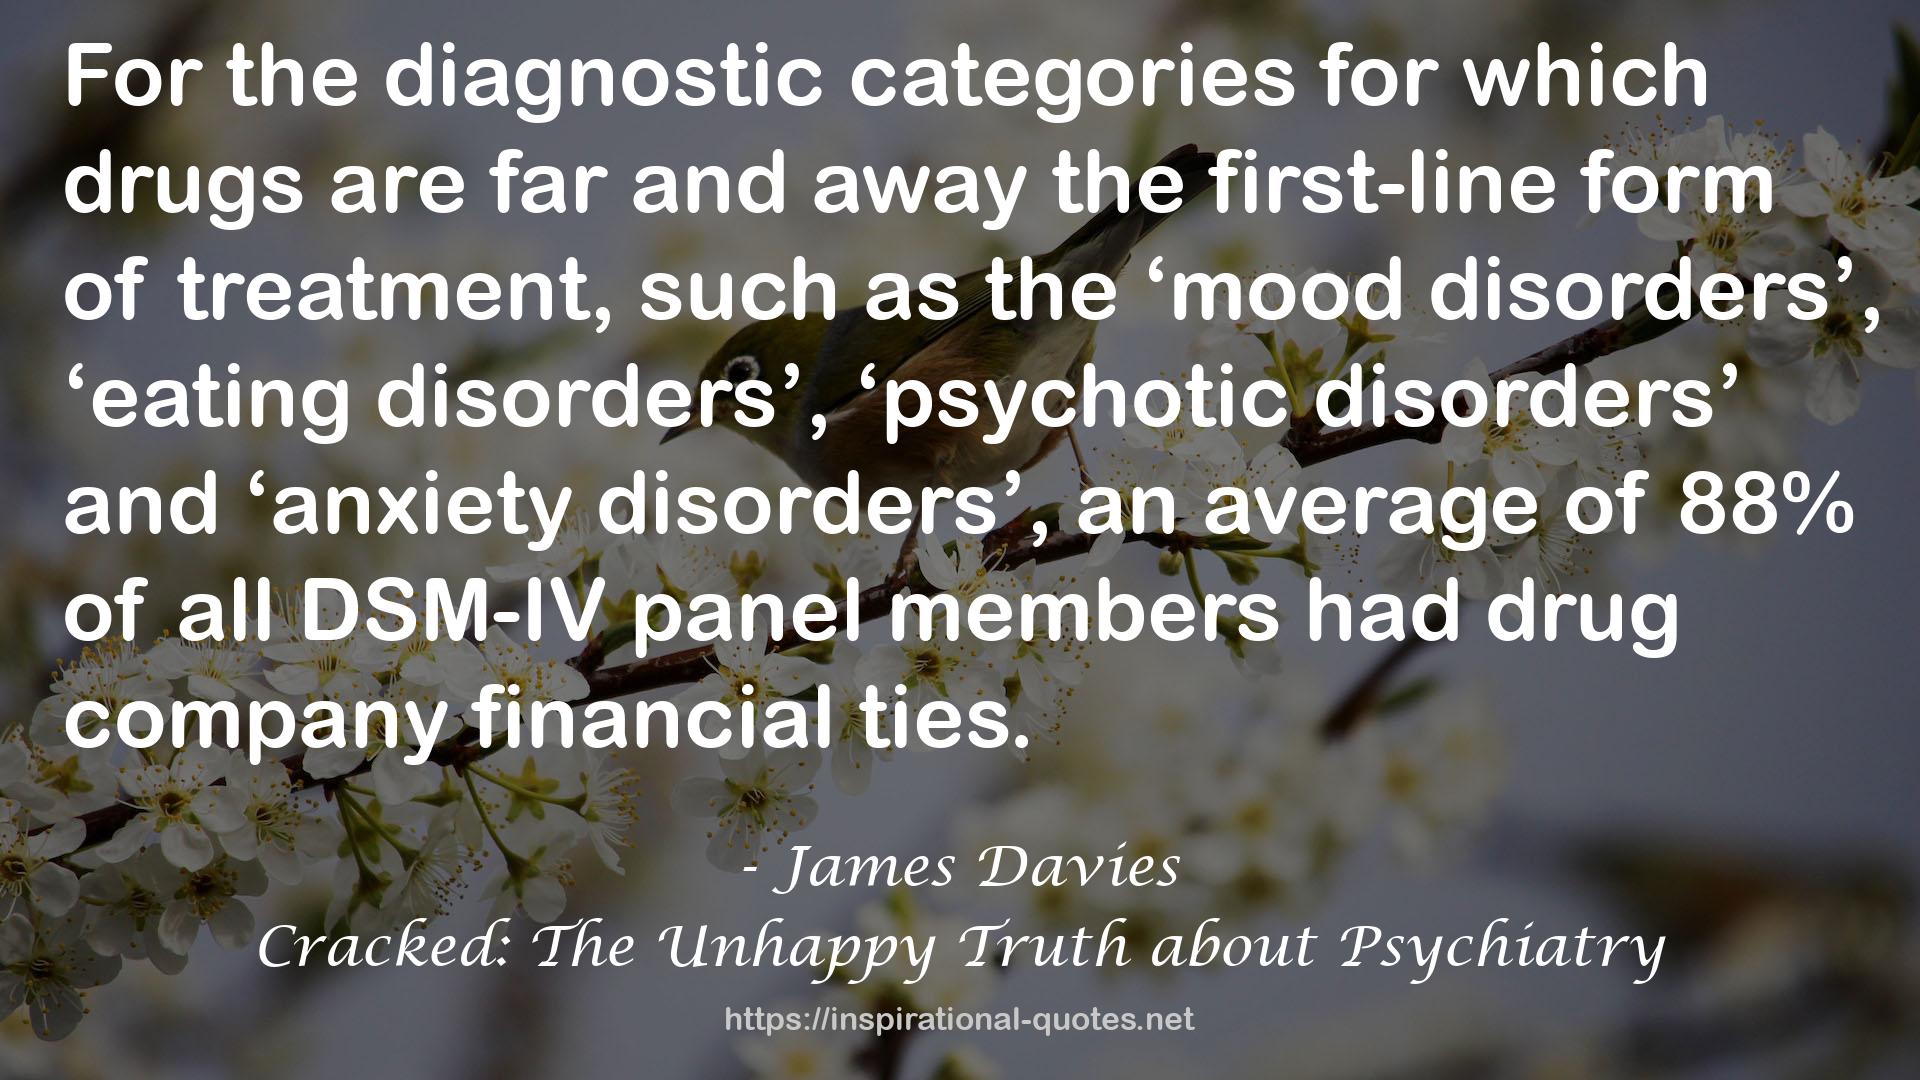 Cracked: The Unhappy Truth about Psychiatry QUOTES